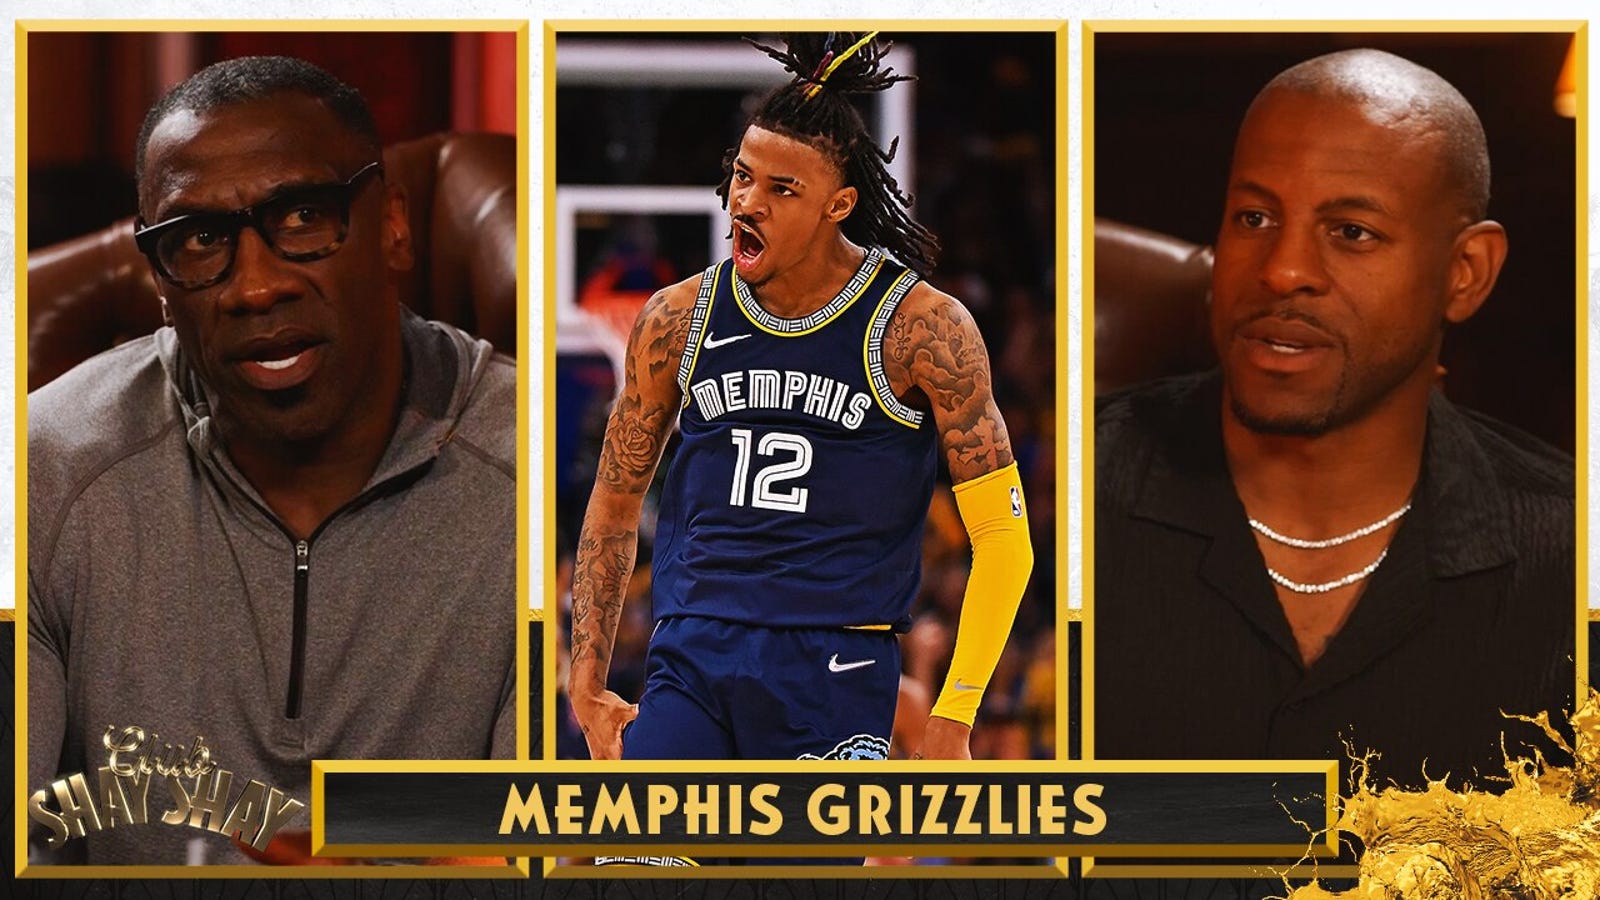 Andre Iguodala on his tenure with Memphis Grizzlies, getting traded and NBA business 